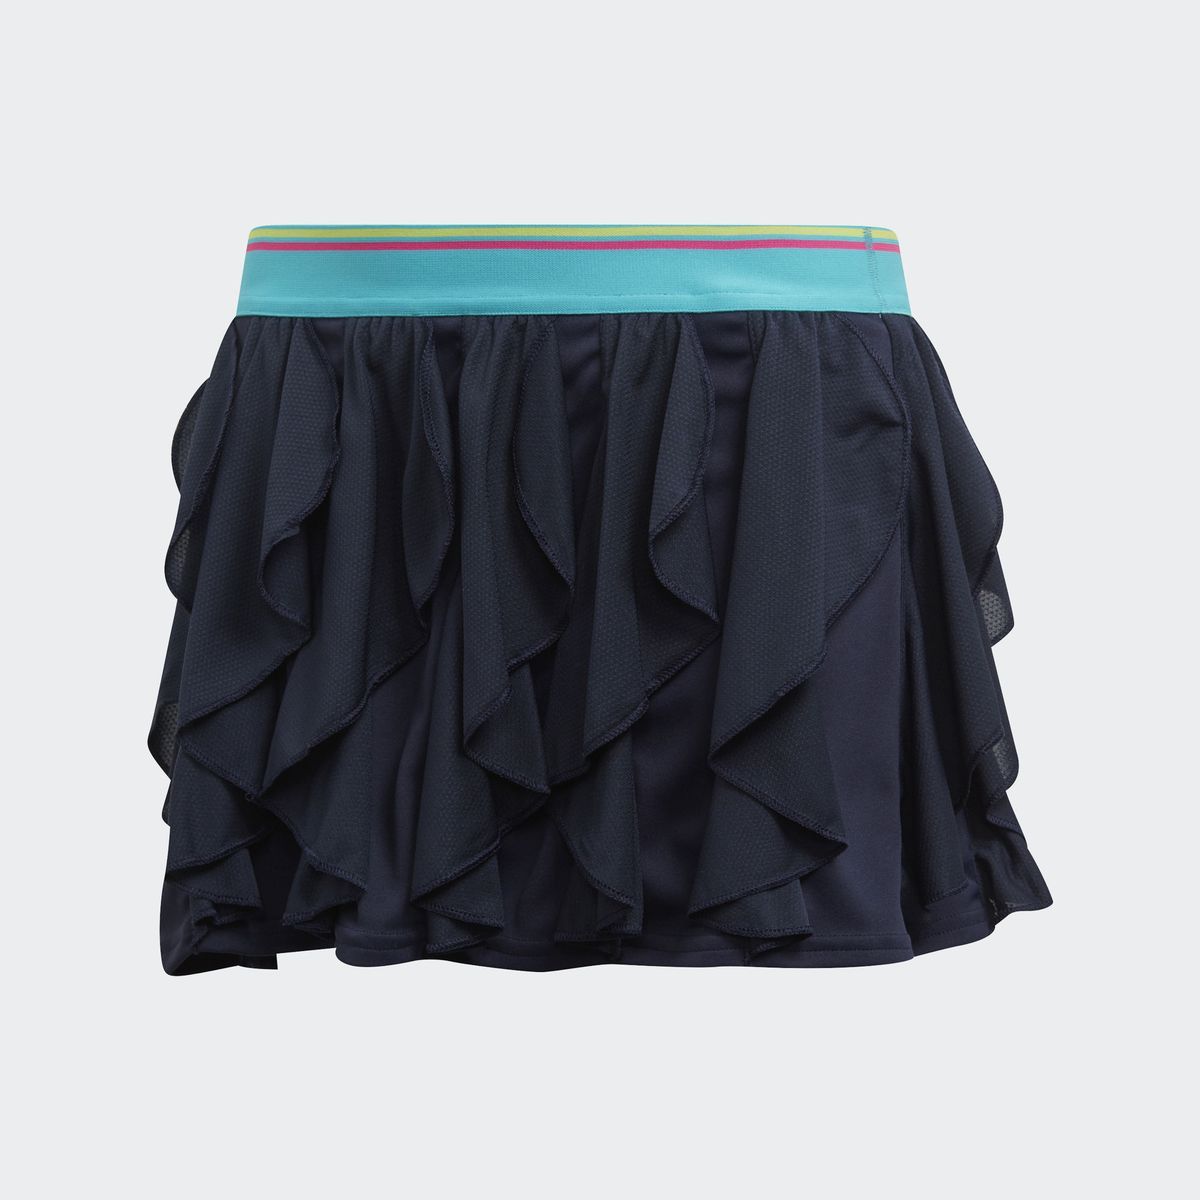    Adidas G Frilly Skirt, : . DH2807.  116